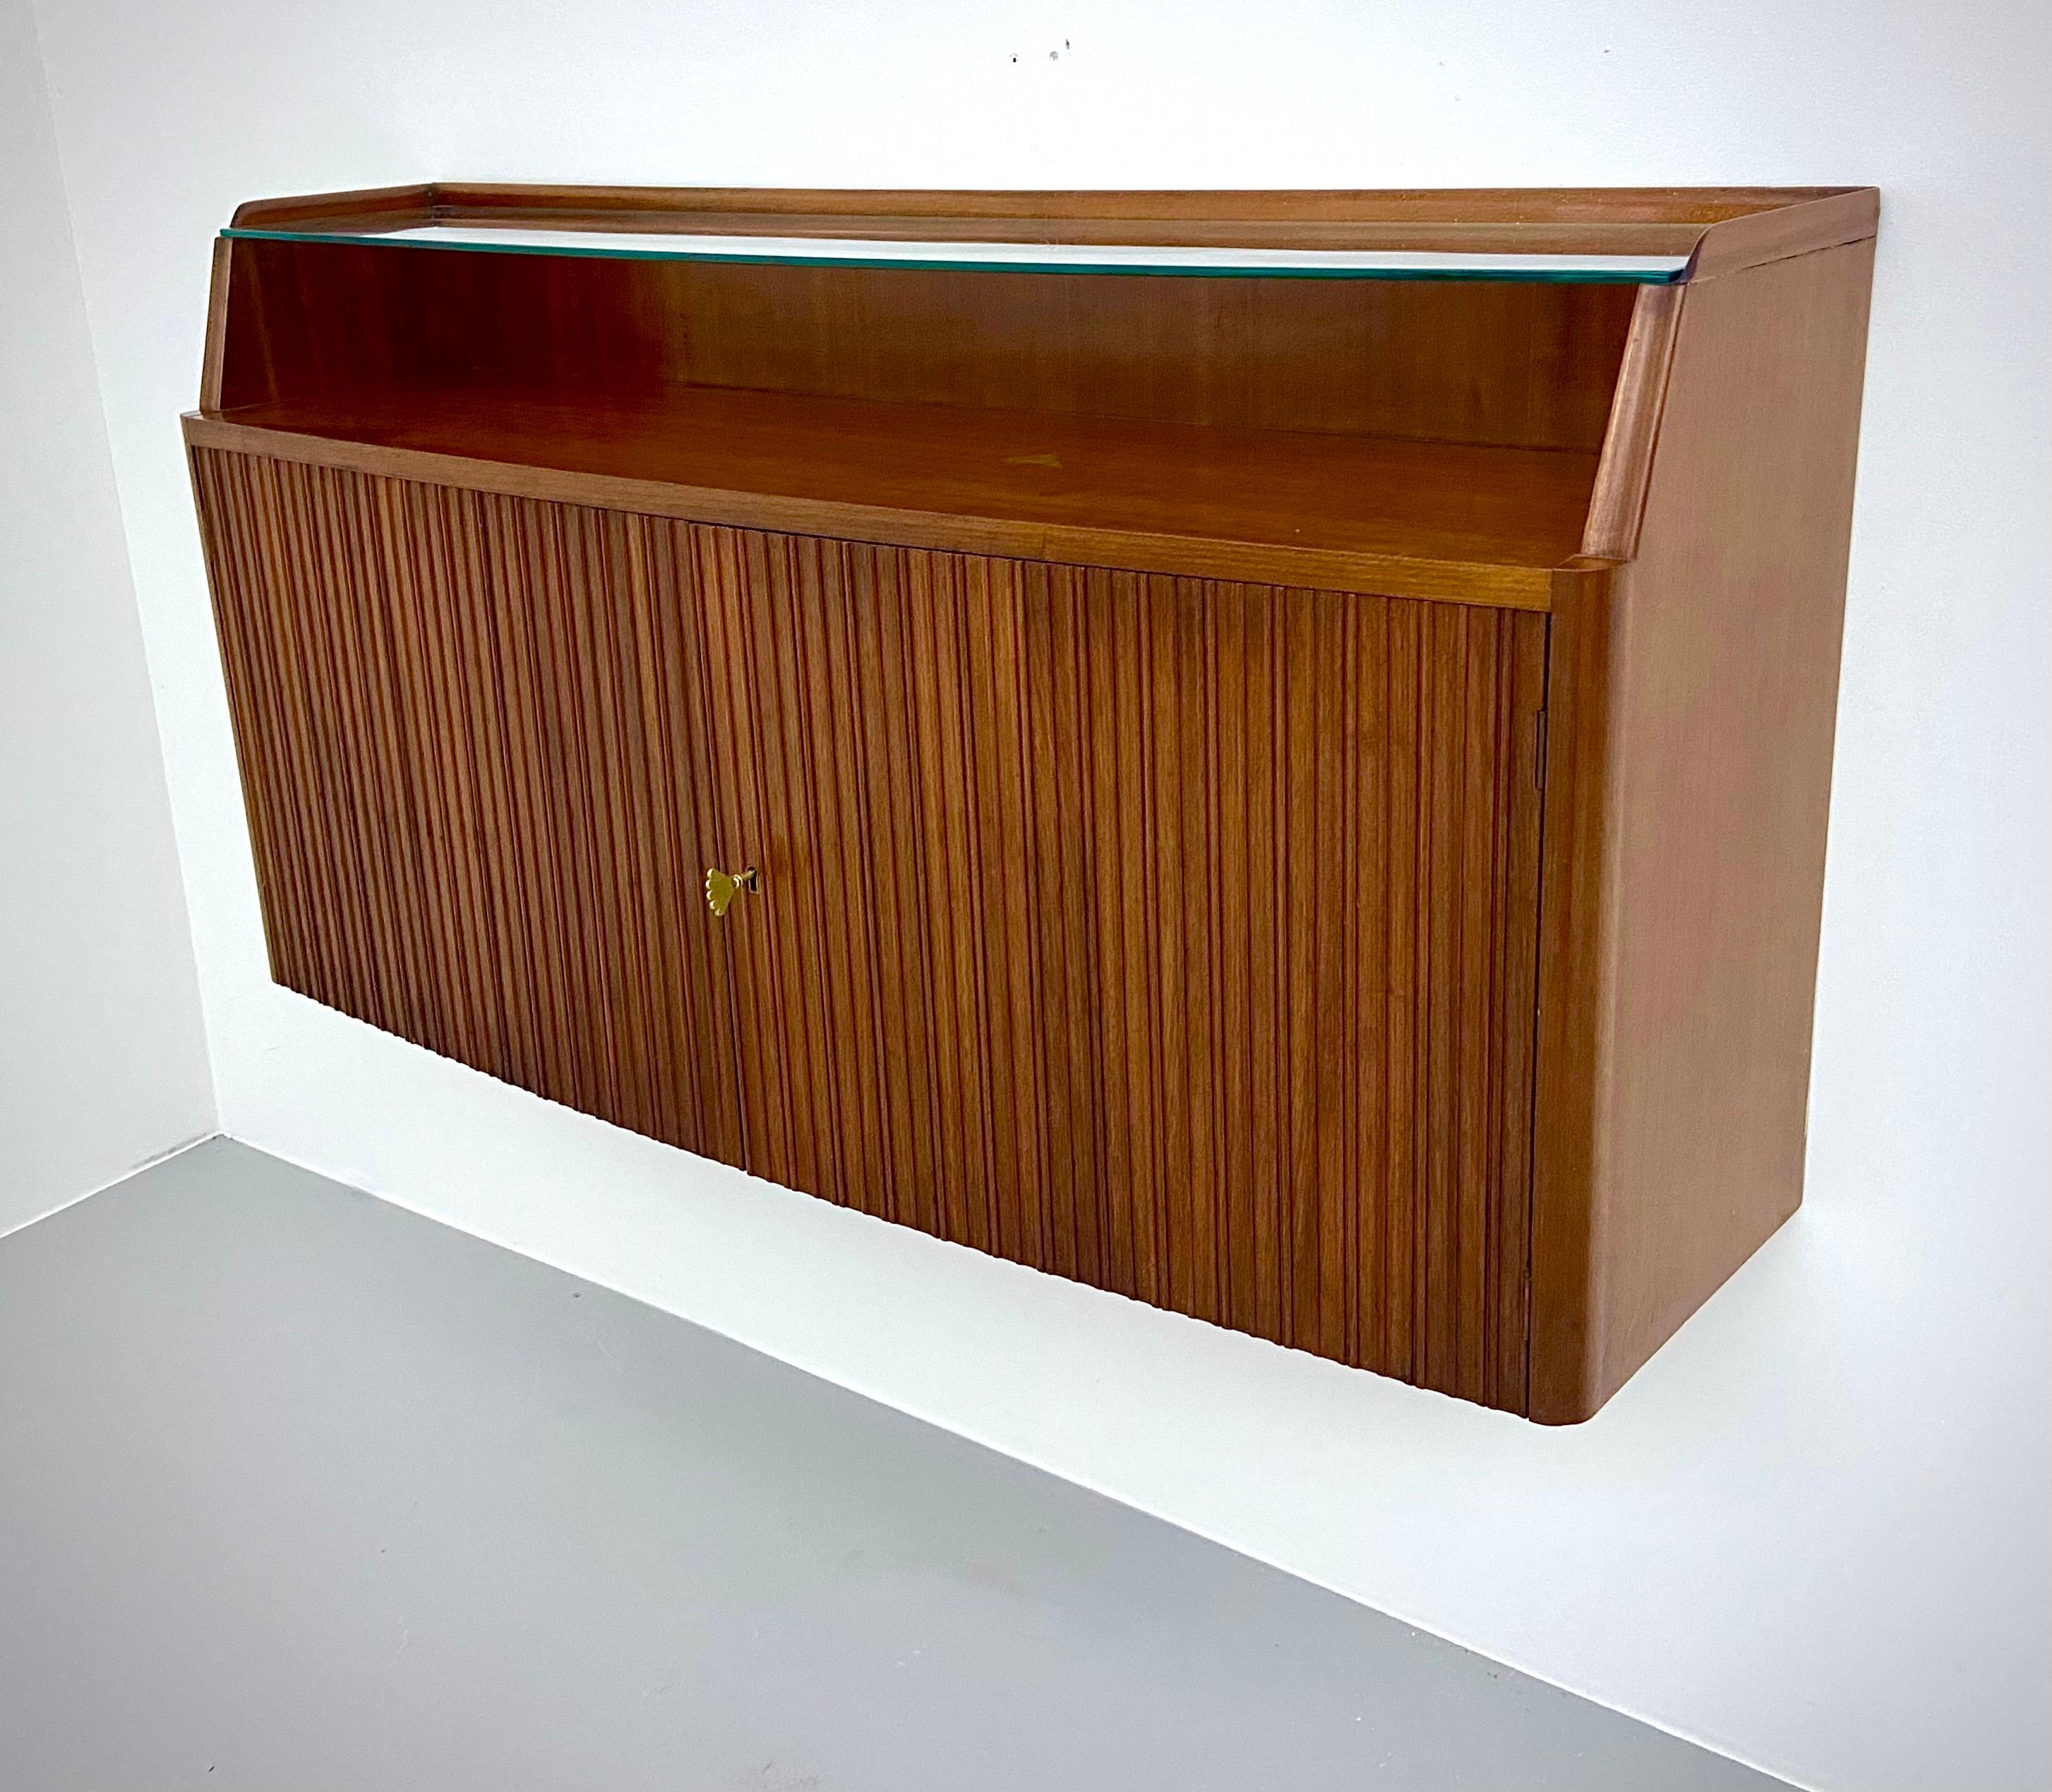 Paolo Buffa wall-mounted ribbed credenza in patinated, brass and glass, by master woodmaker Serafino Arrighi, 1950's

What stands out in this small wall mounted credenza is the ribbed surface, the rounded forms and the not unimportant detail: the